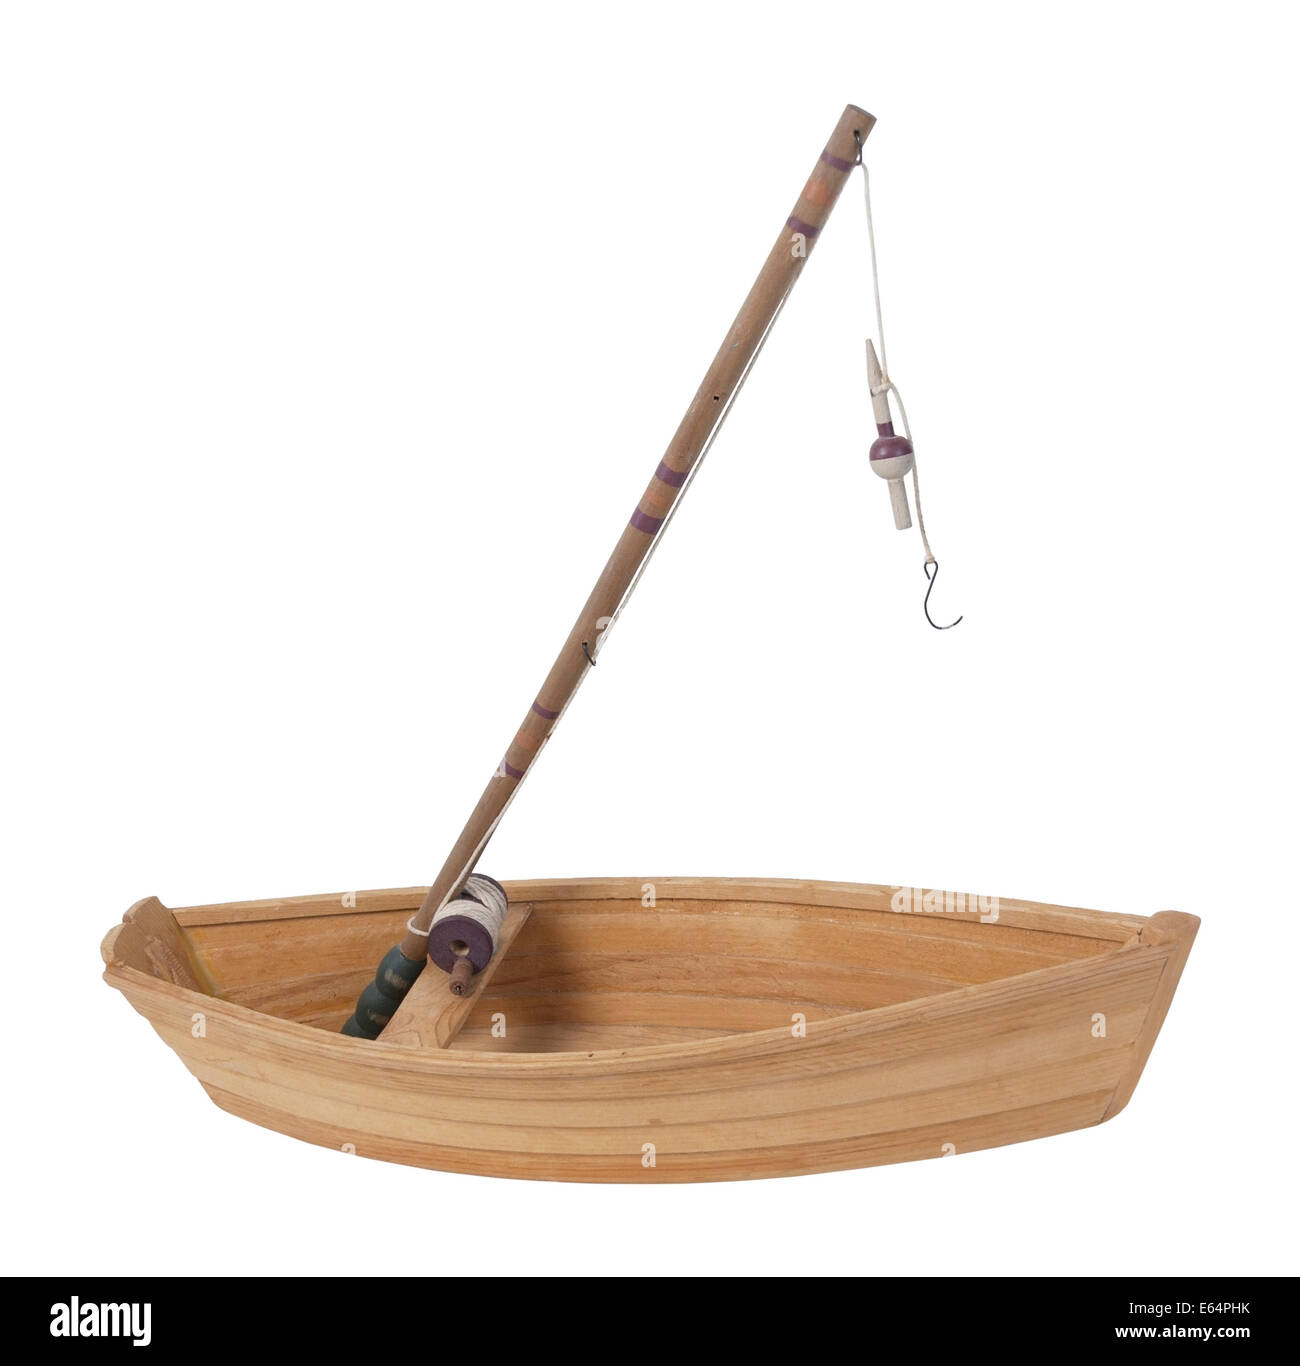 Fishing pole with rod and reel used to catch fish sitting in a wooden boat  - path included Stock Photo - Alamy